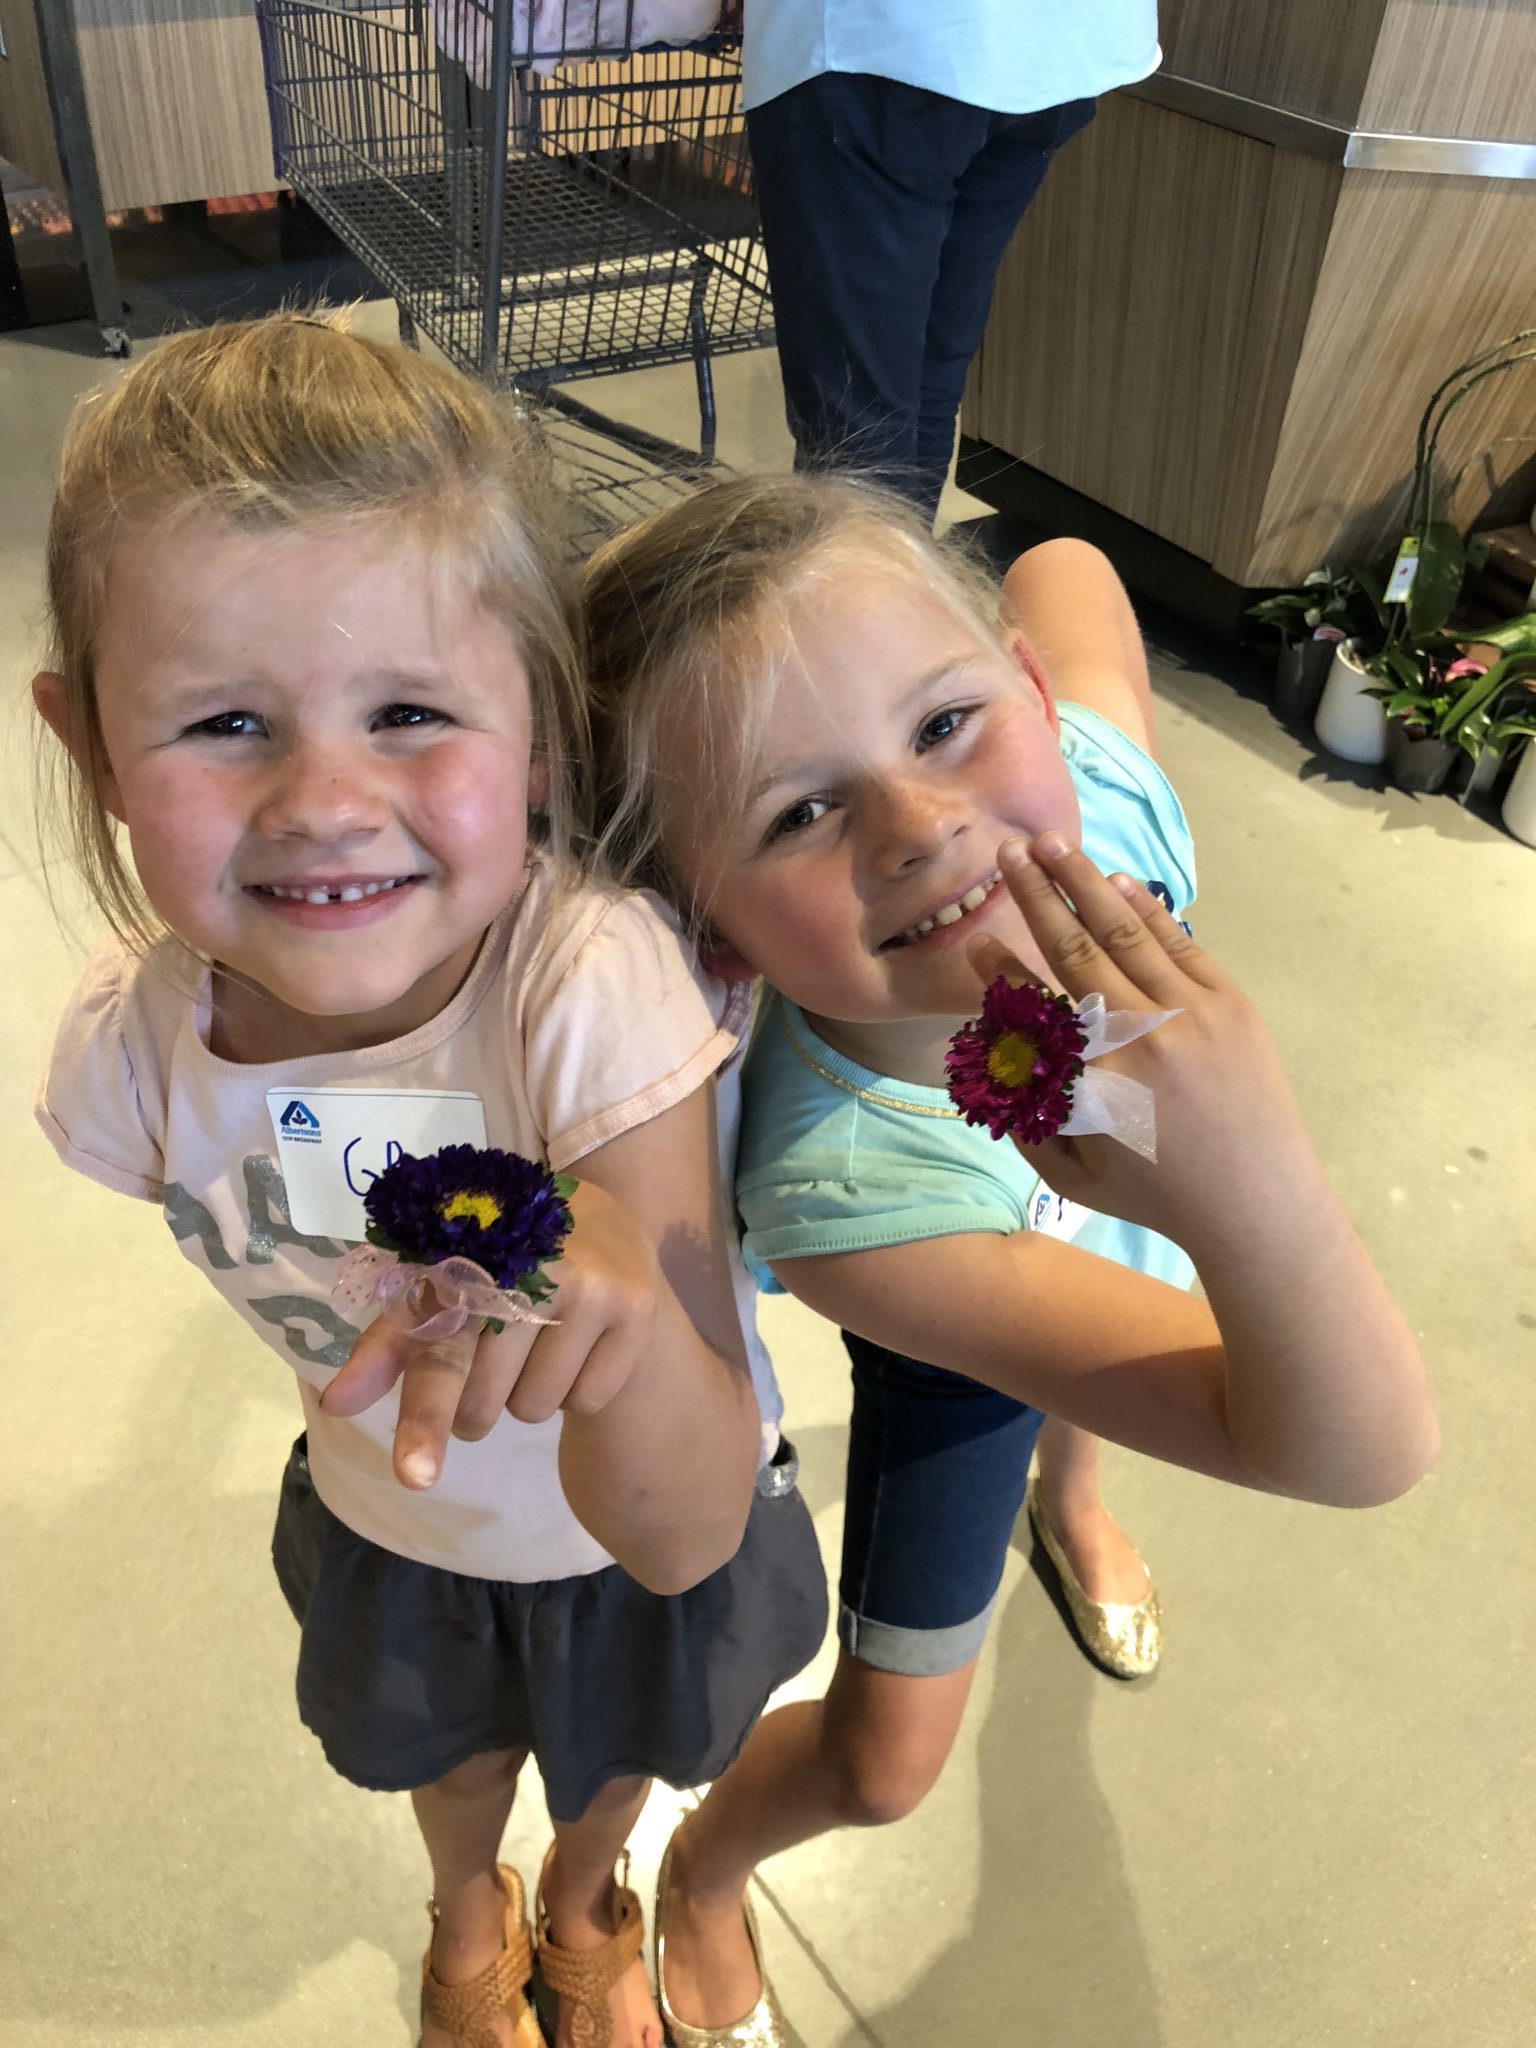 Two young girls smiling with Albertsons fresh flower rings